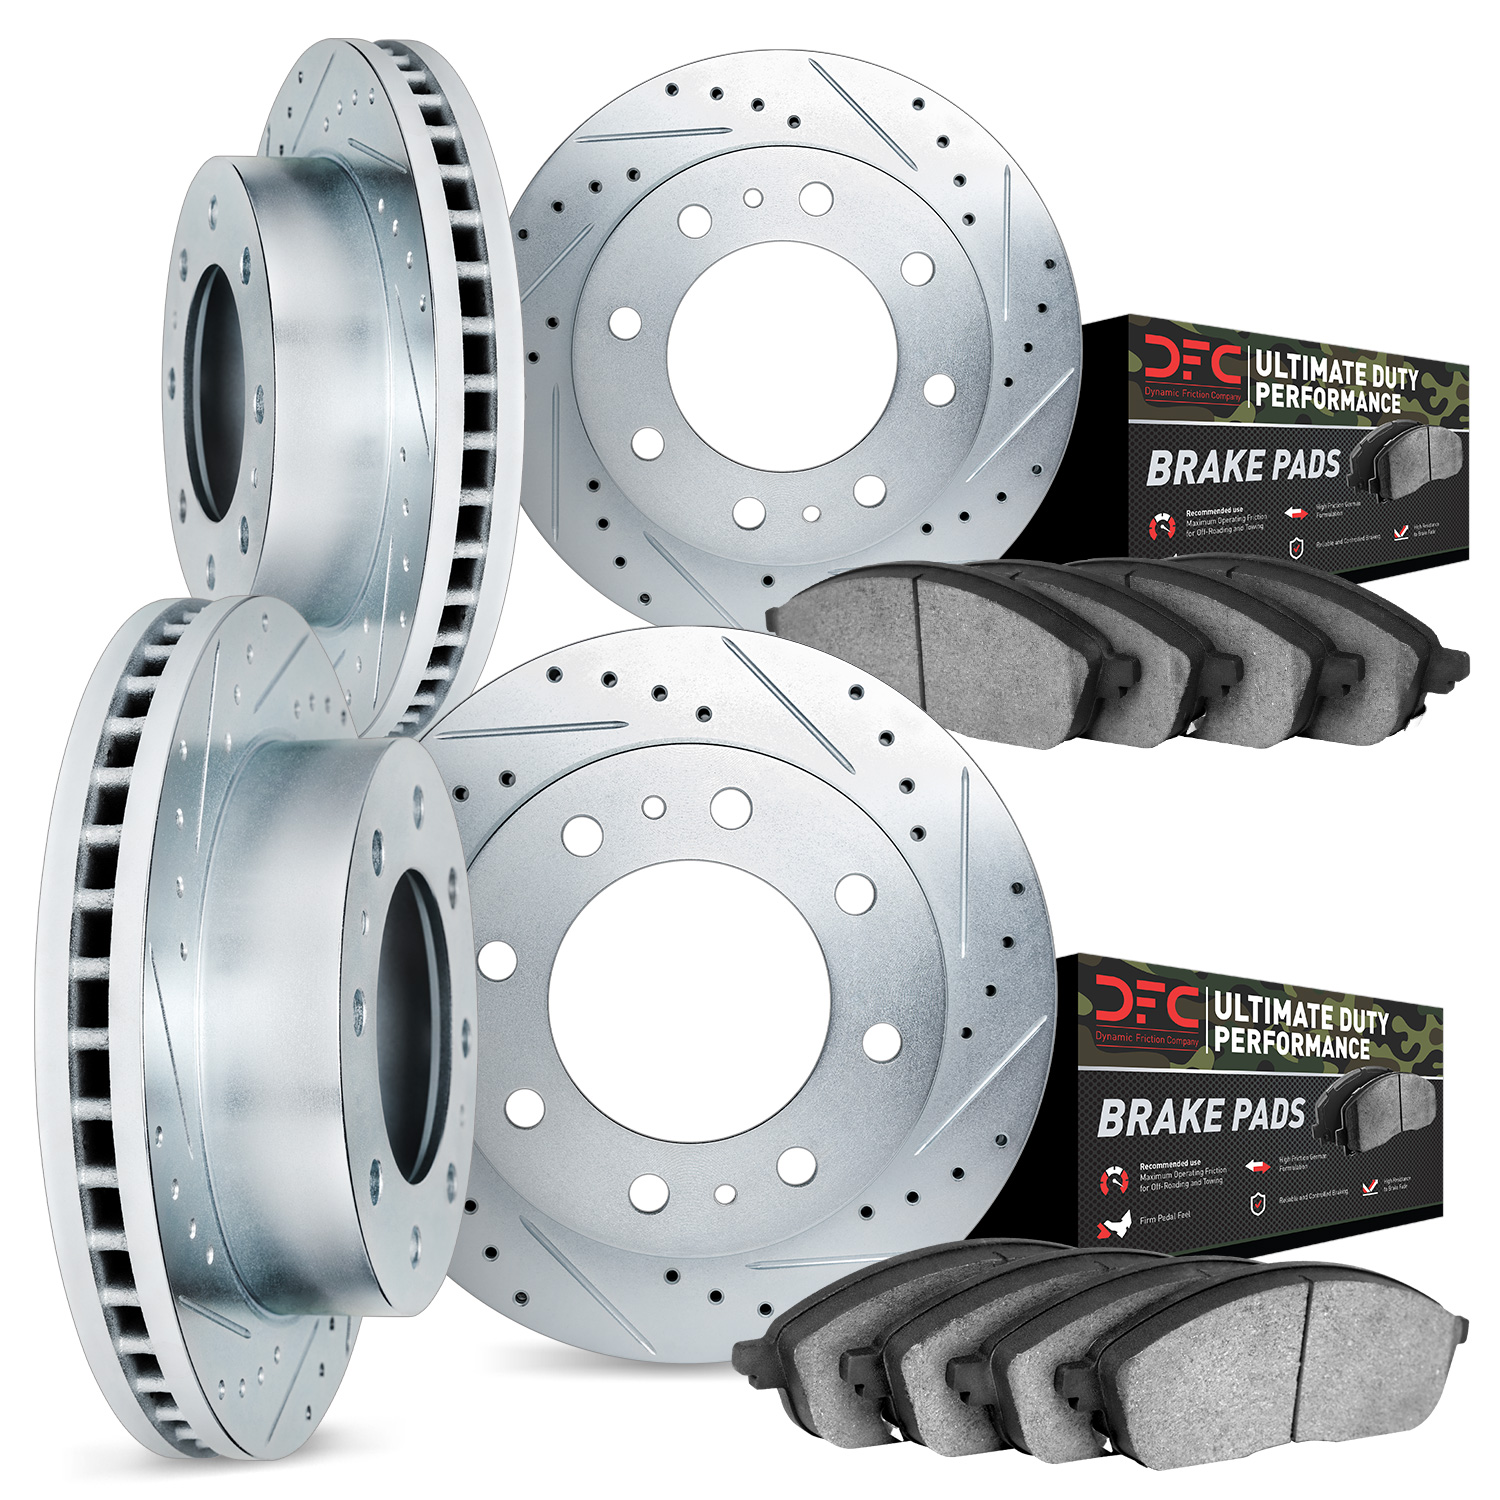 7404-54010 Drilled/Slotted Brake Rotors with Ultimate-Duty Brake Pads Kit [Silver], 1999-1999 Ford/Lincoln/Mercury/Mazda, Positi